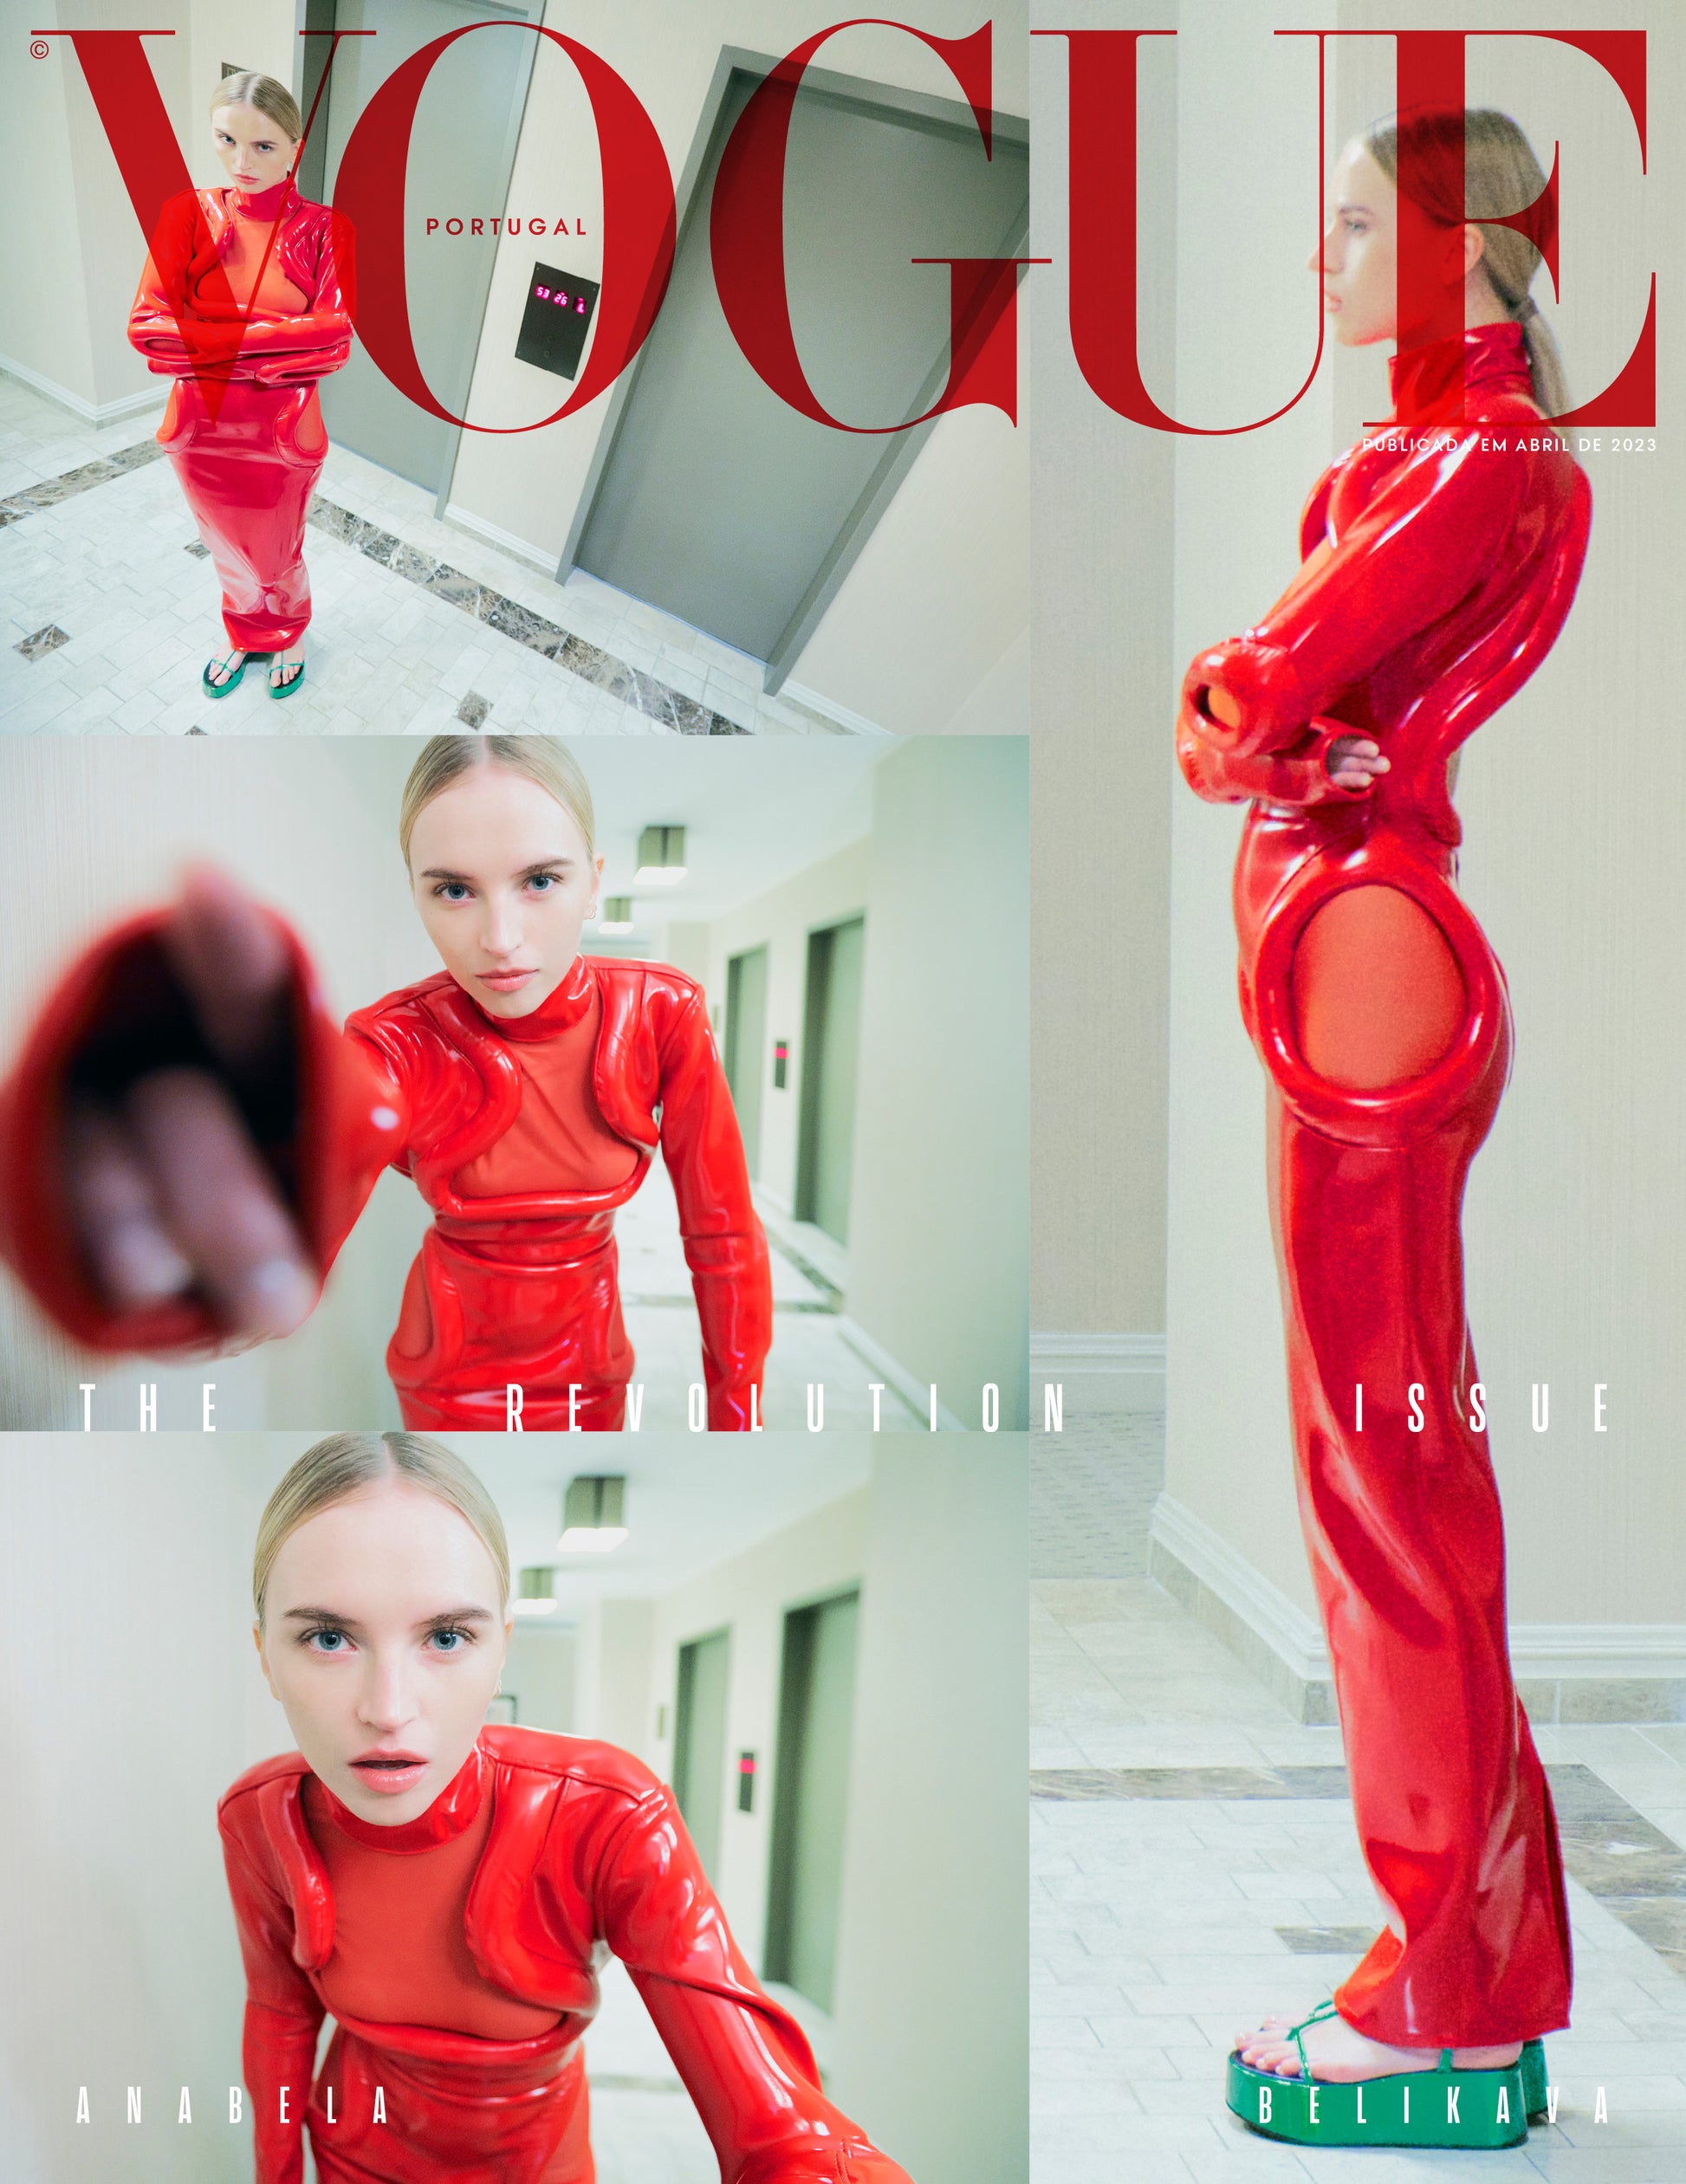 Vogue Portugal  The Revolution Issue - Cover 2 – Lighthouse